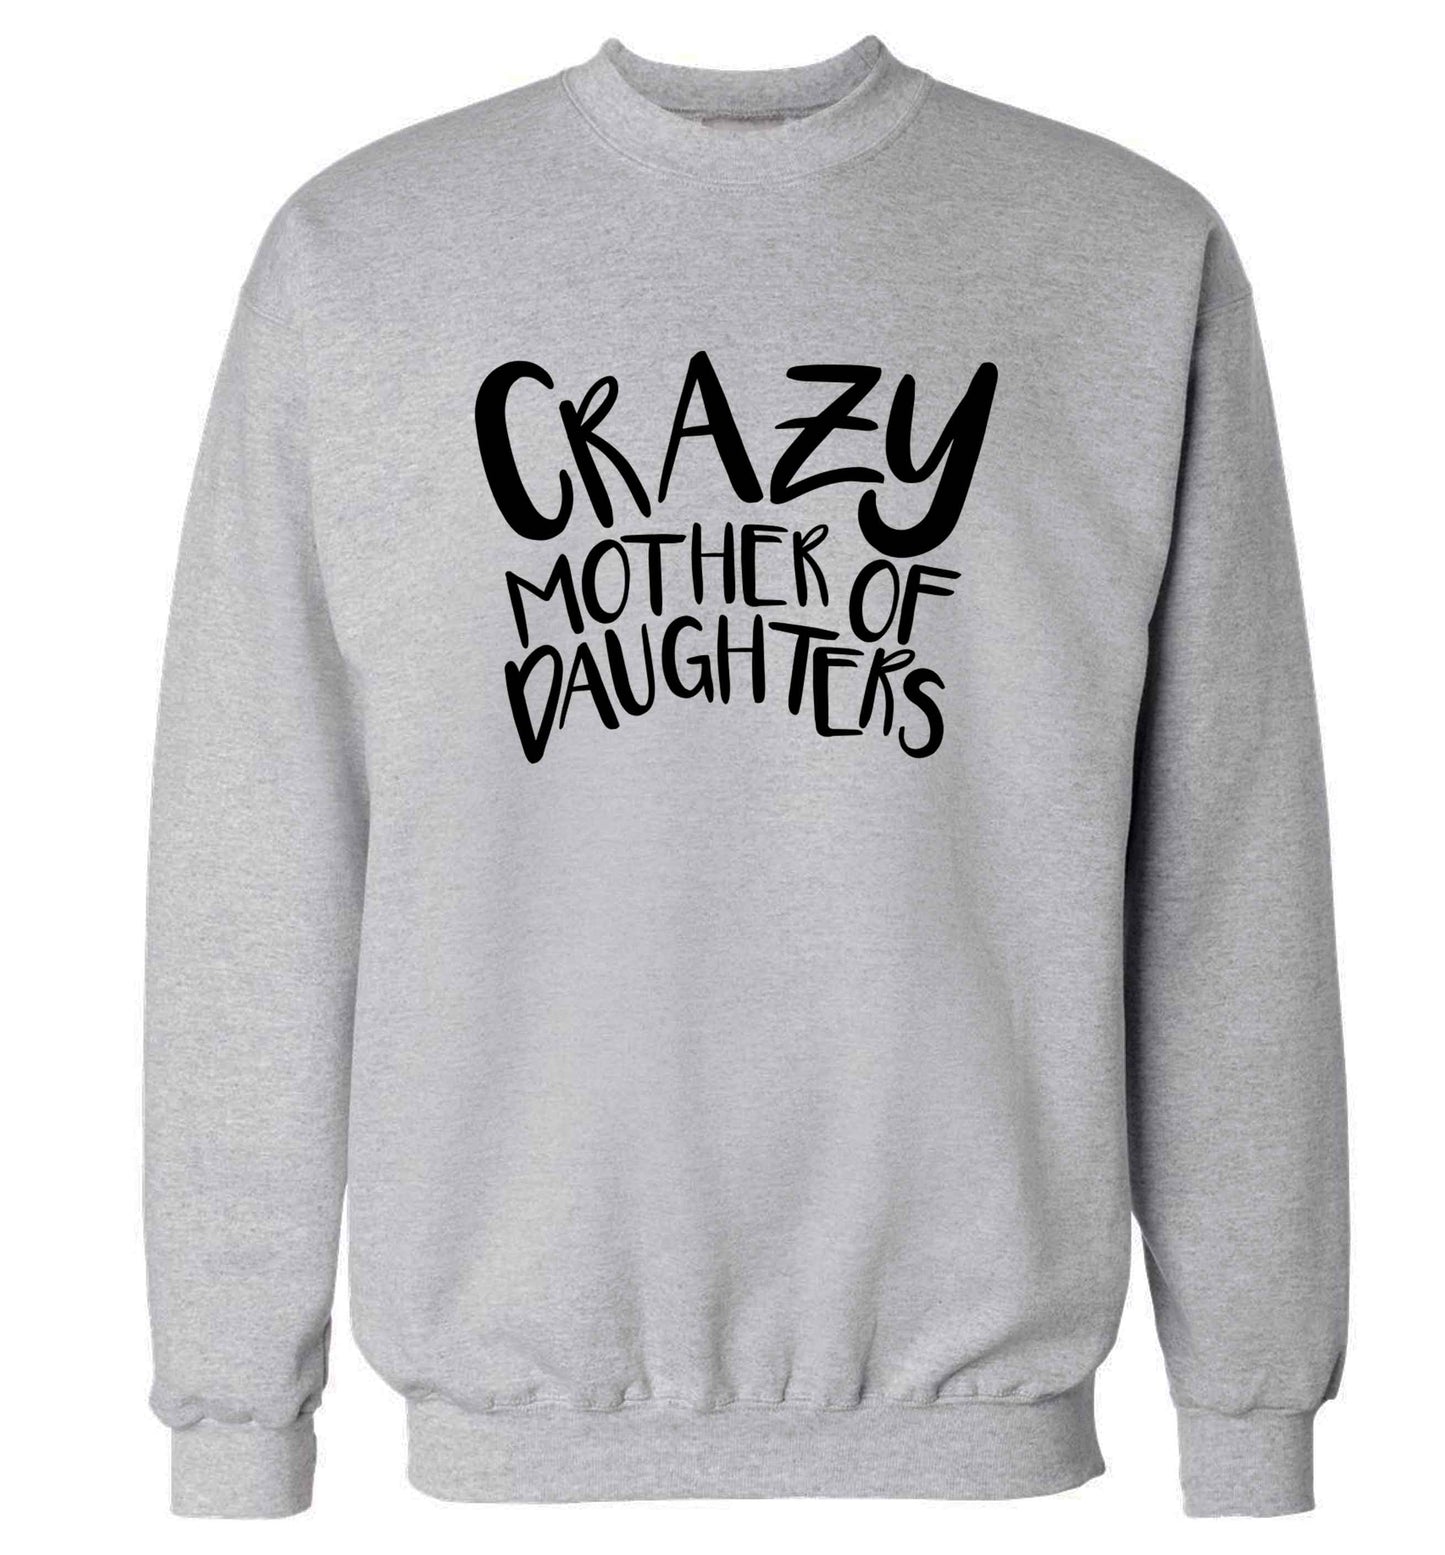 Crazy mother of daughters adult's unisex grey sweater 2XL